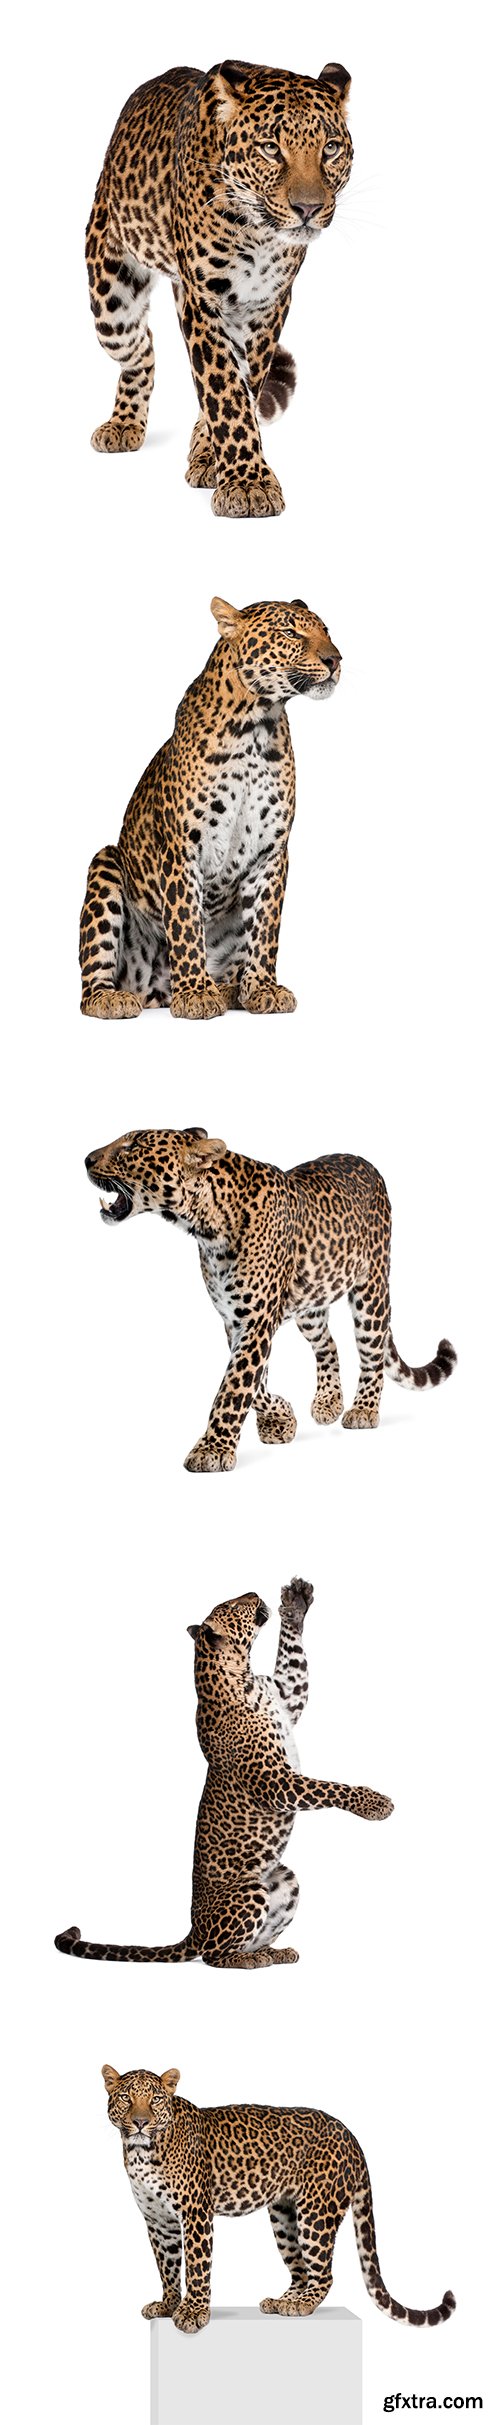 Leopard Isolated - 10xJPGs